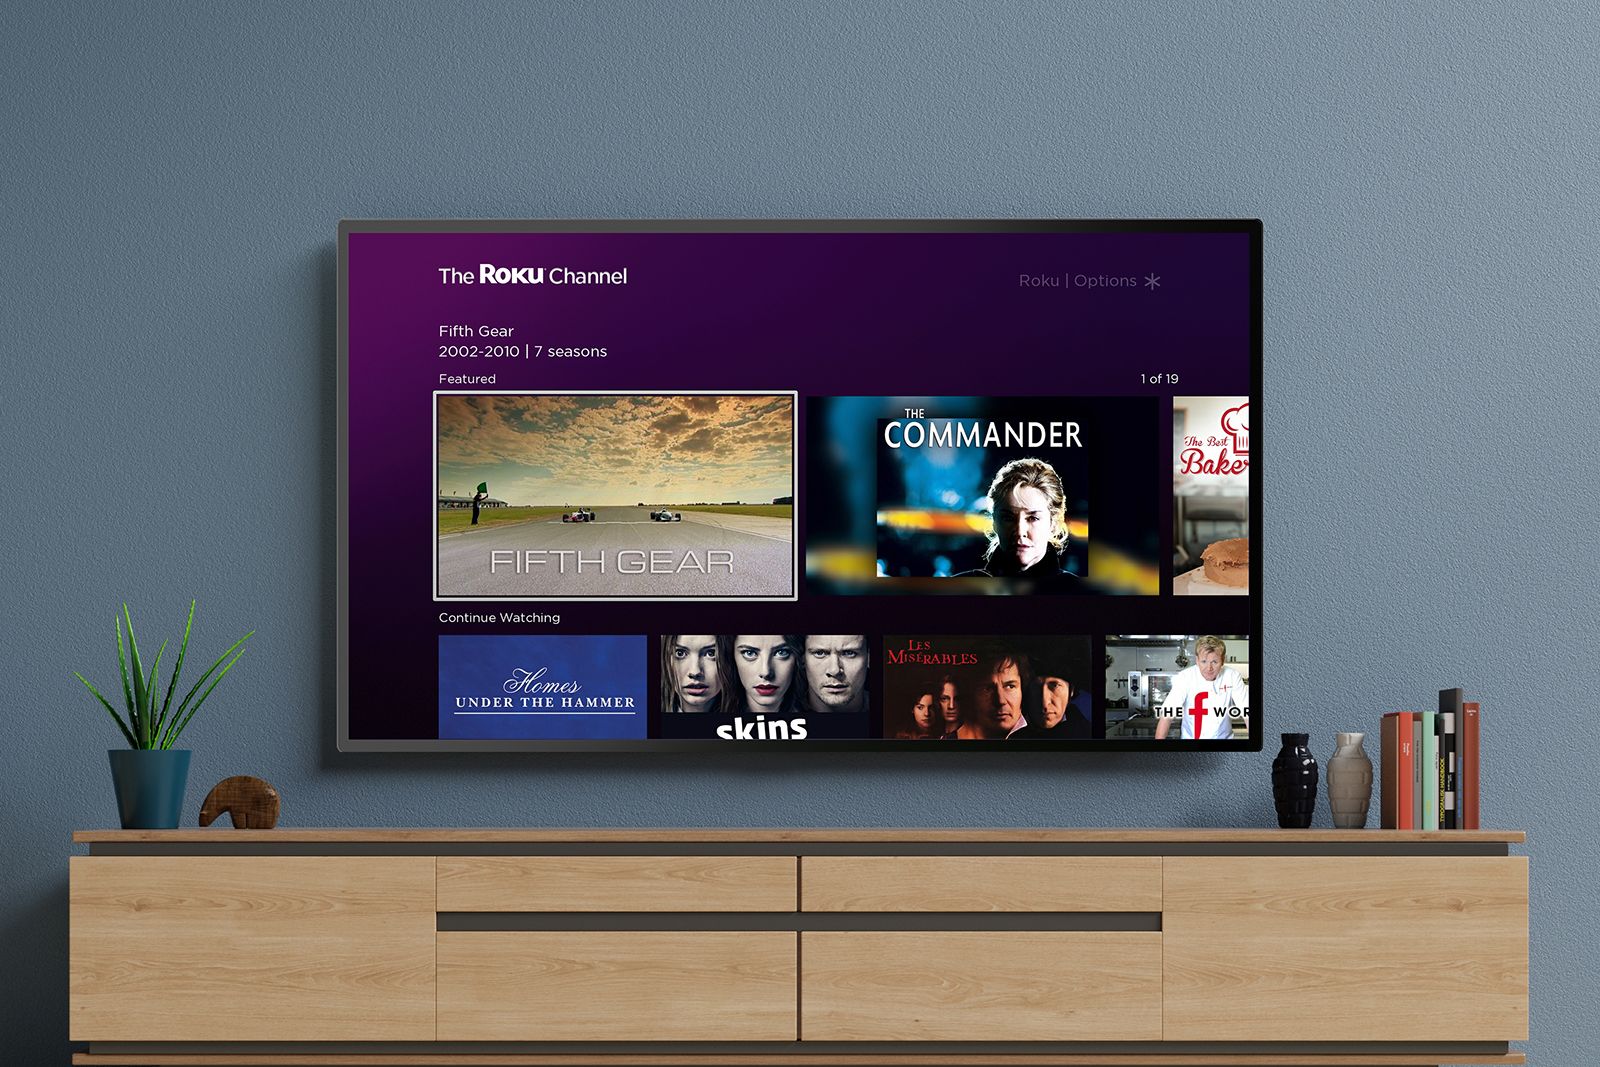 The Roku Channel launches in the UK - free shows and movies for Roku Now TV and Sky Q devicesimage 1